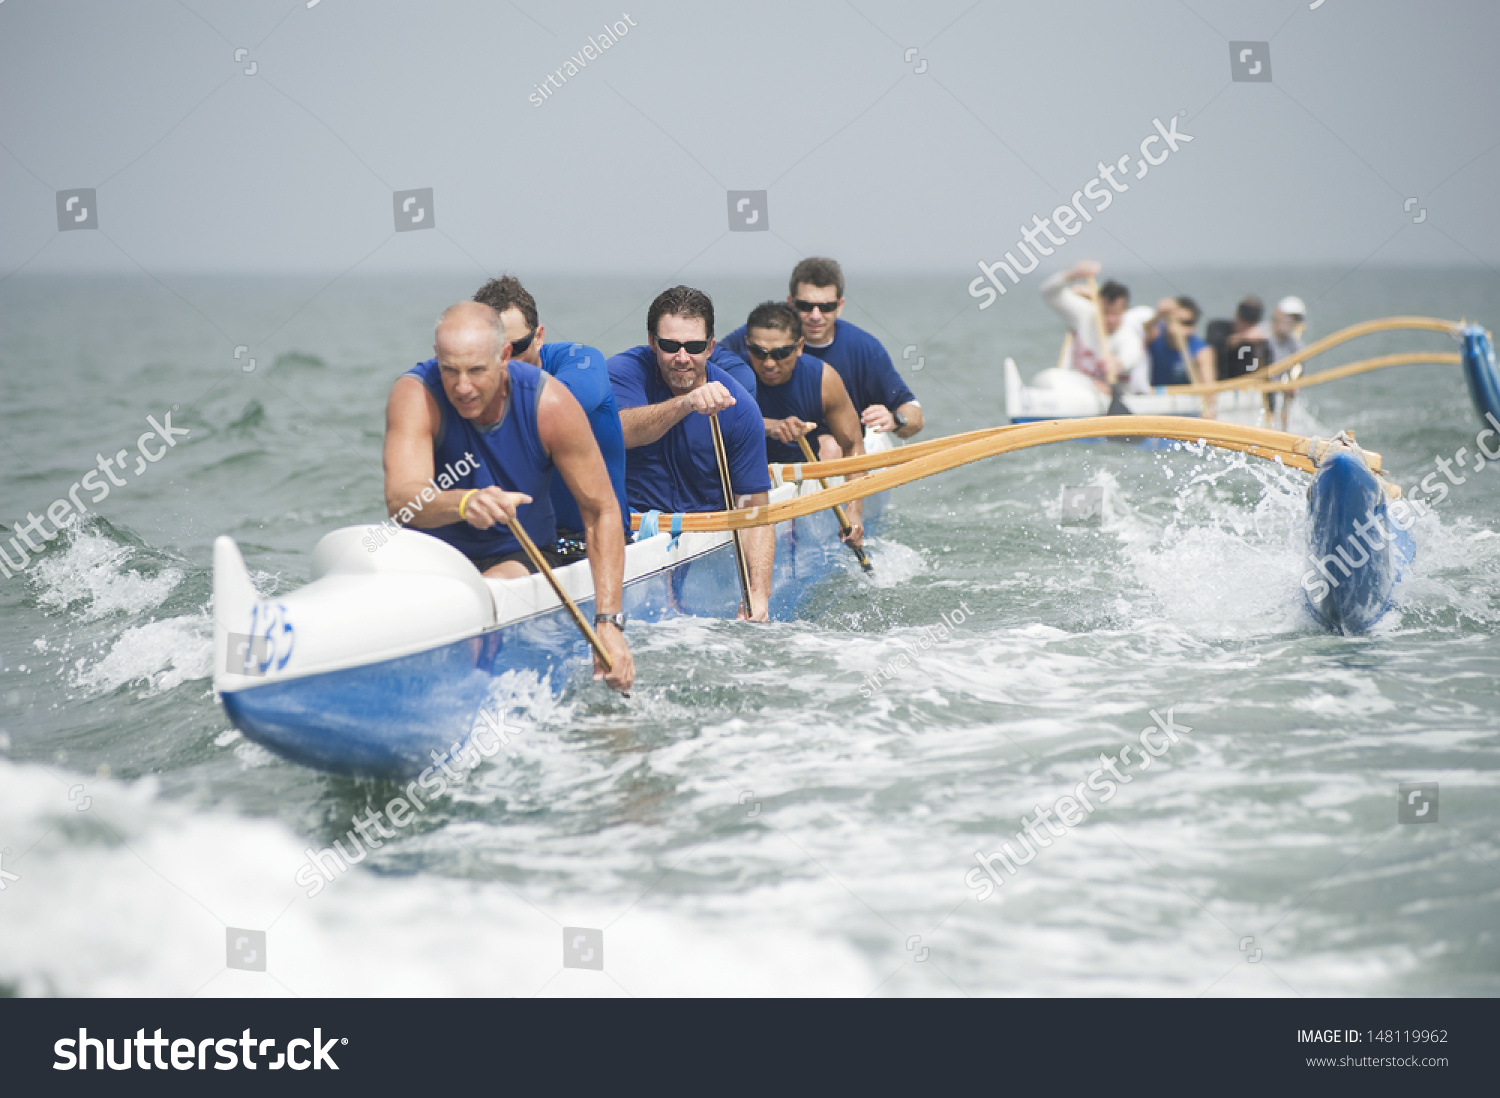 Crew of a racing outrigger canoe on water #148119962